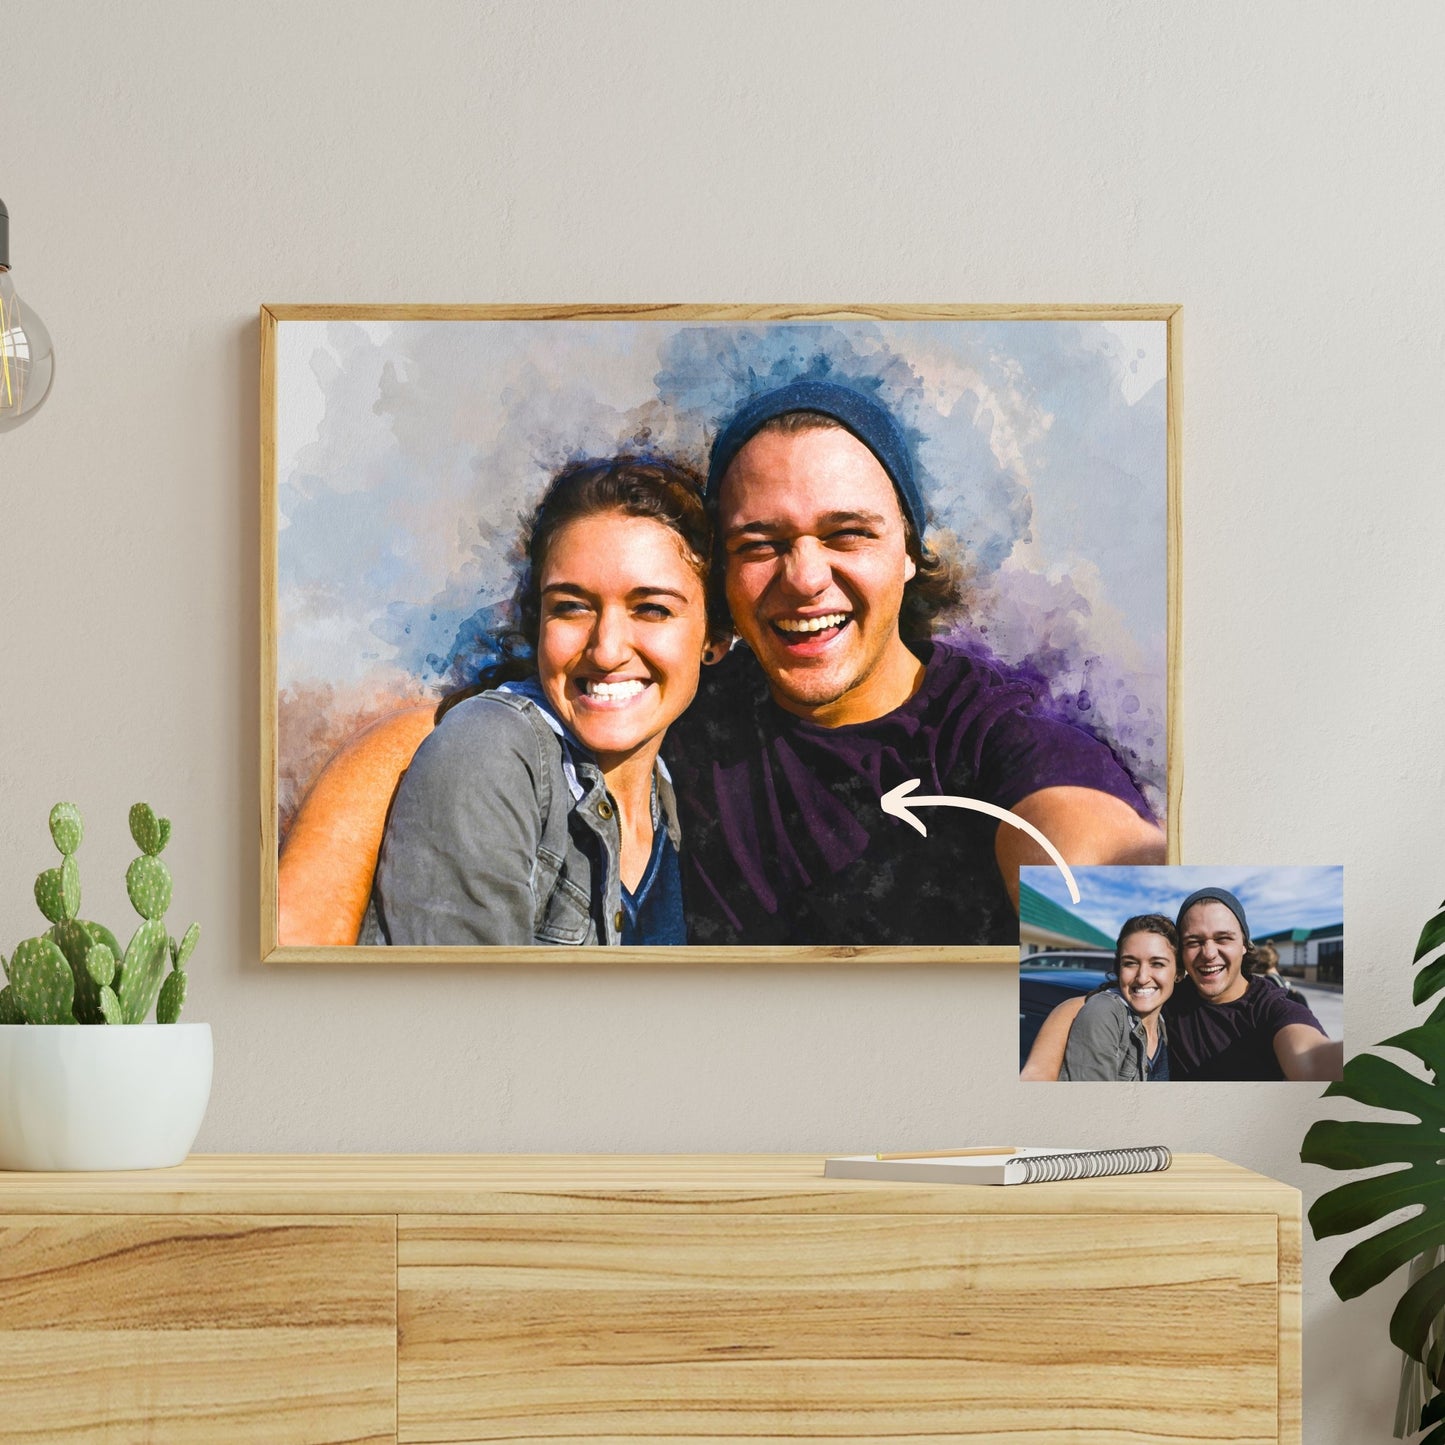 Create personalized wall art: Turn your photo into a stunning painting.